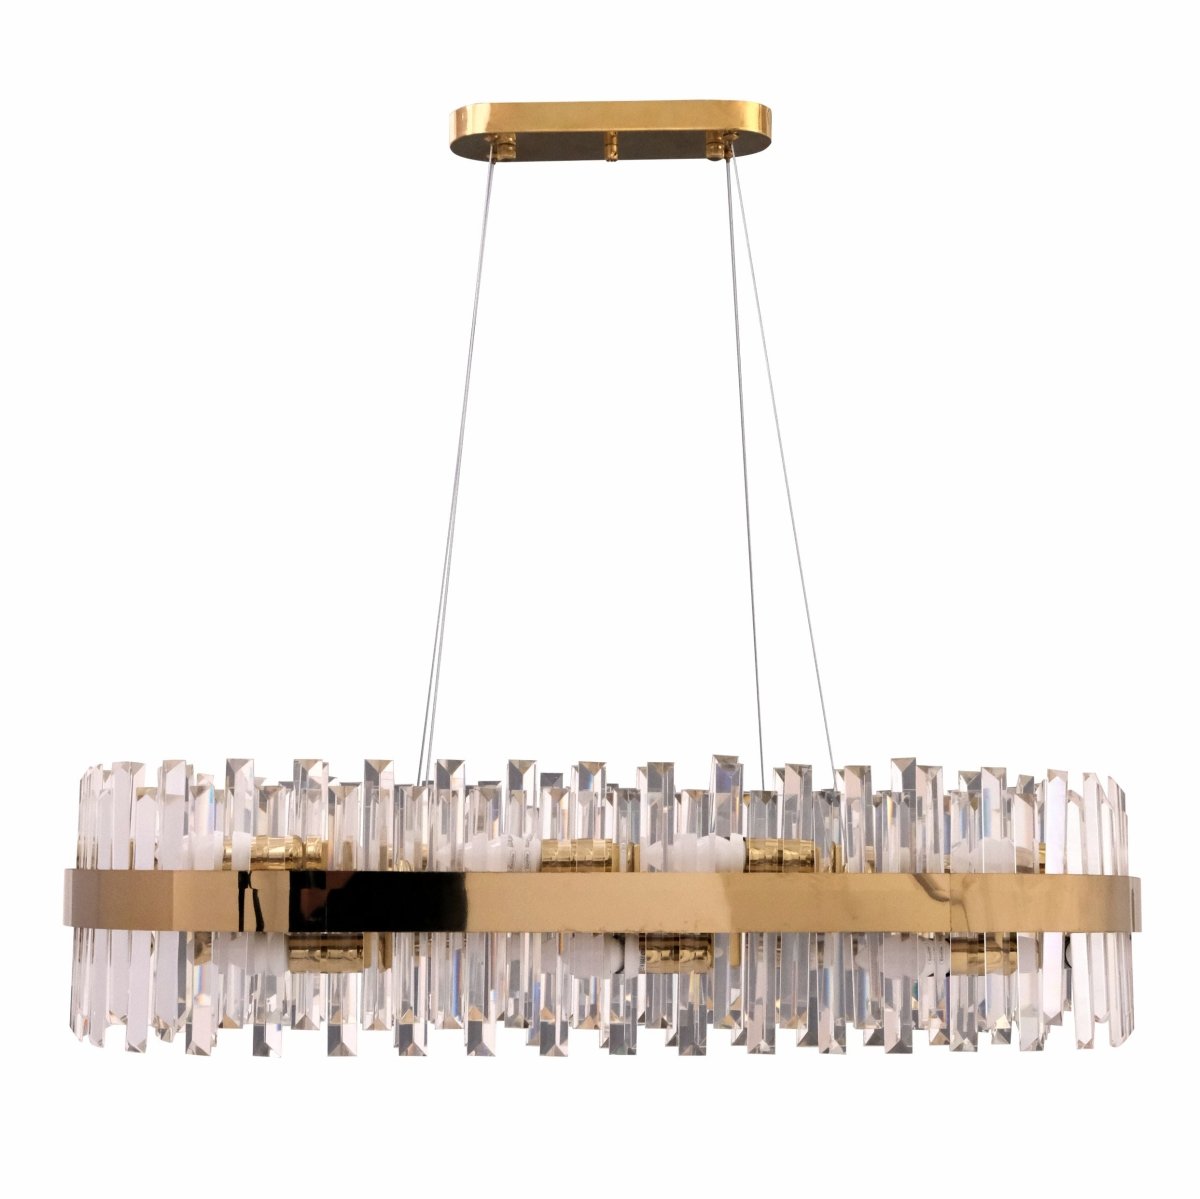 Main image of Coffin Crystal Gold Metal Island Chandelier L900 with 18xE14 Fitting | TEKLED 156-19562